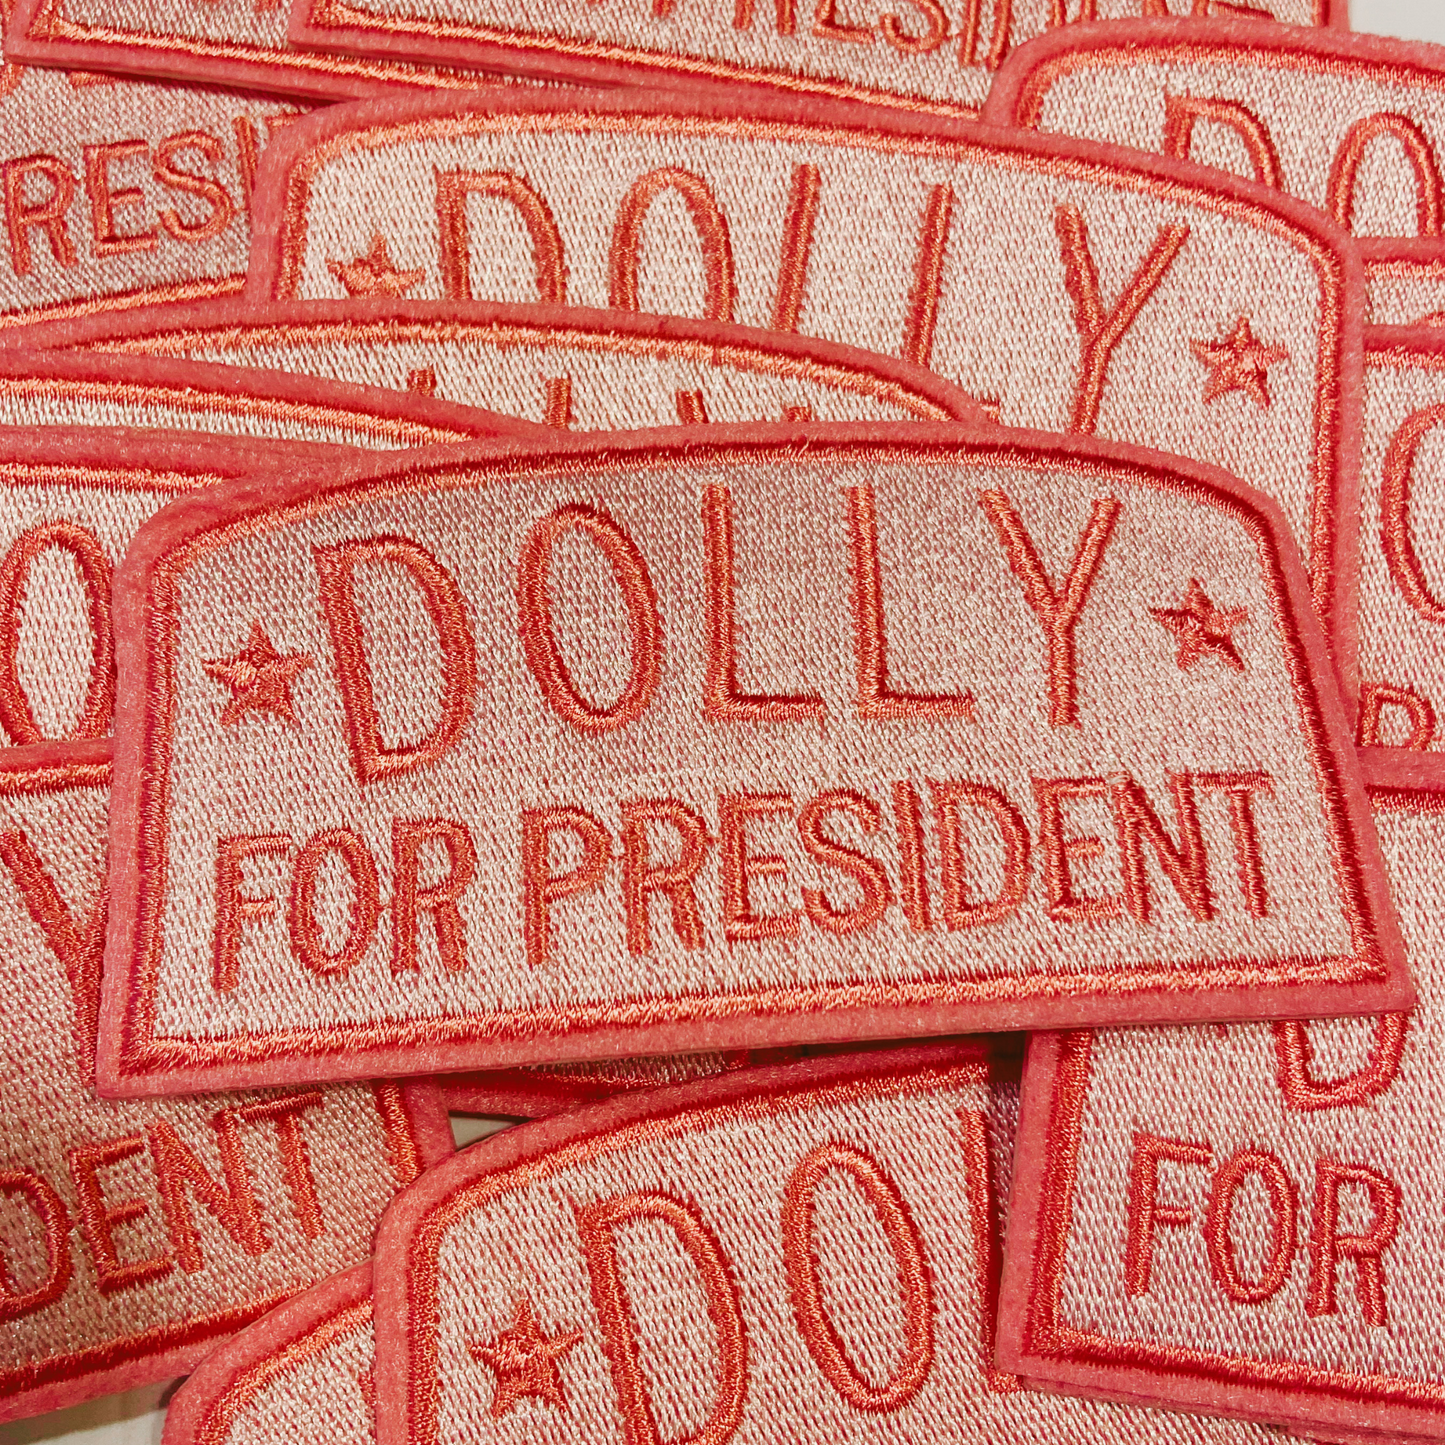 4"  DOLLY for President -  Embroidered Hat Patch (Version 2)